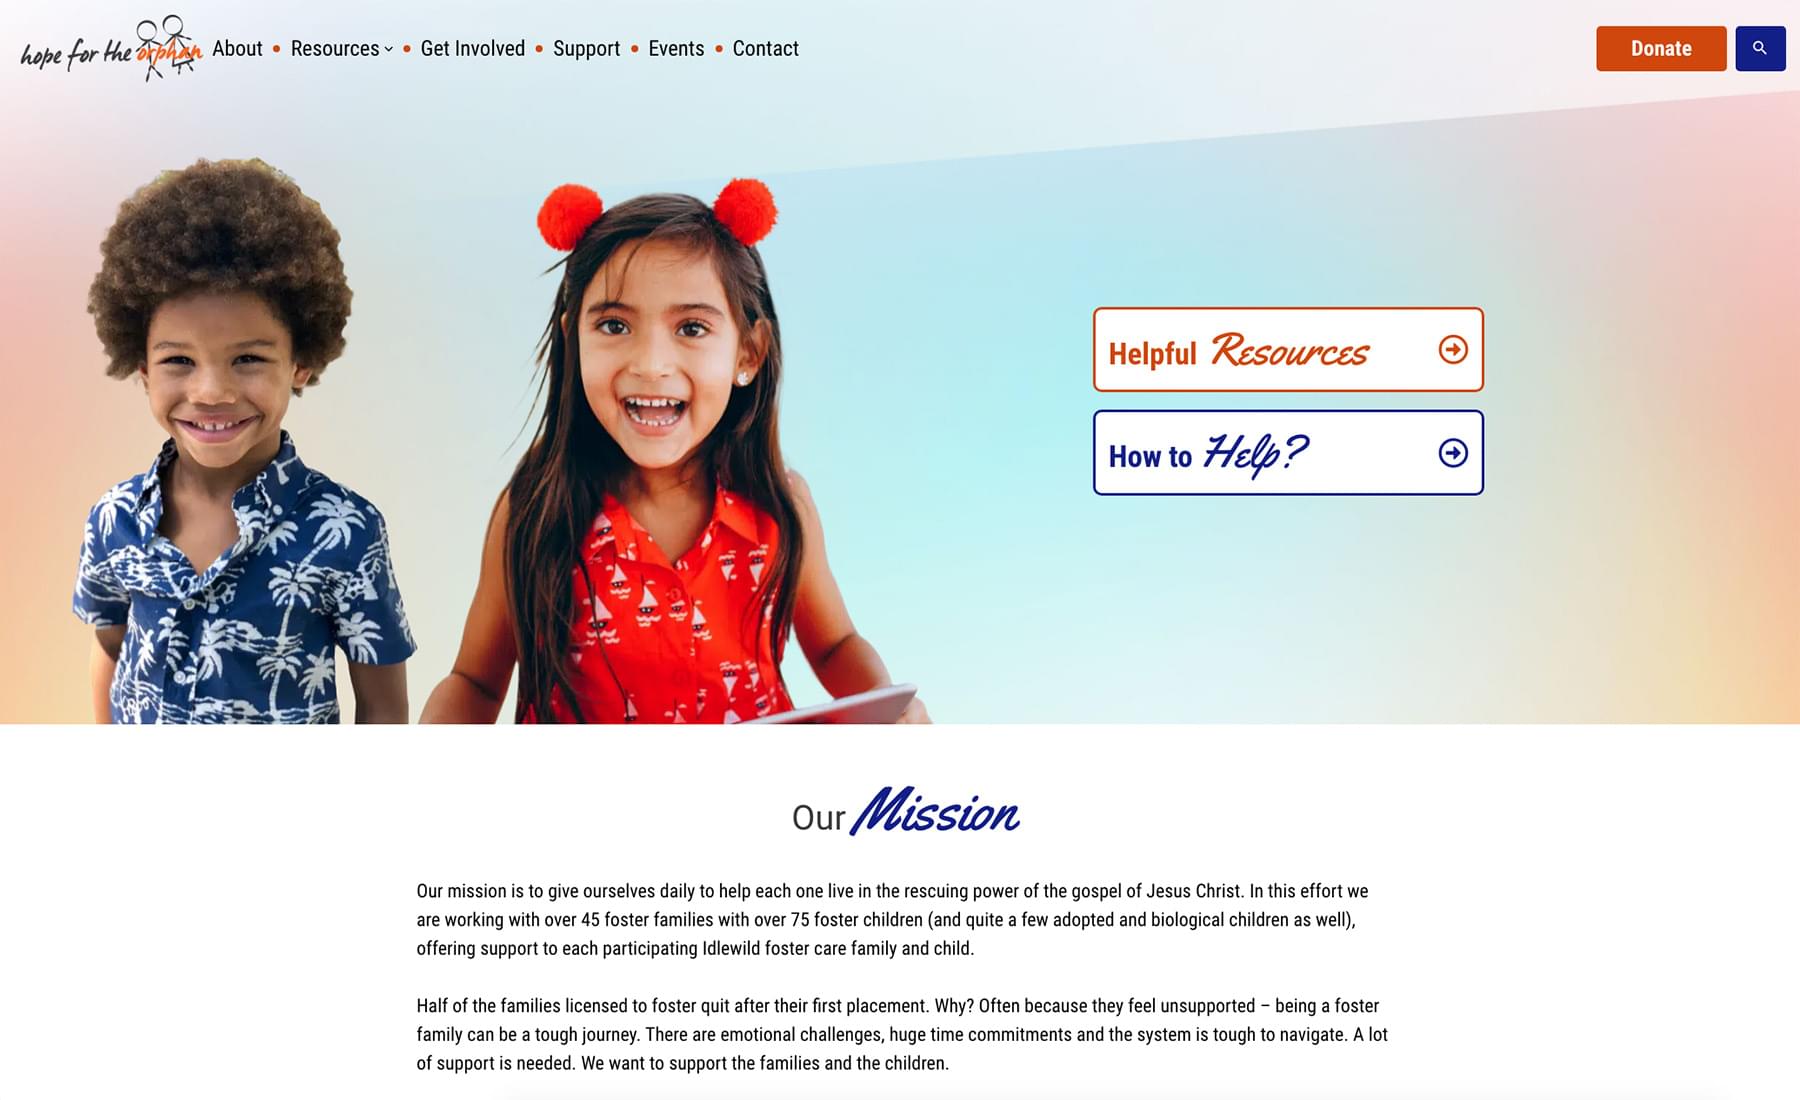 Hope for the Orphan Site - Home Page Screenshot